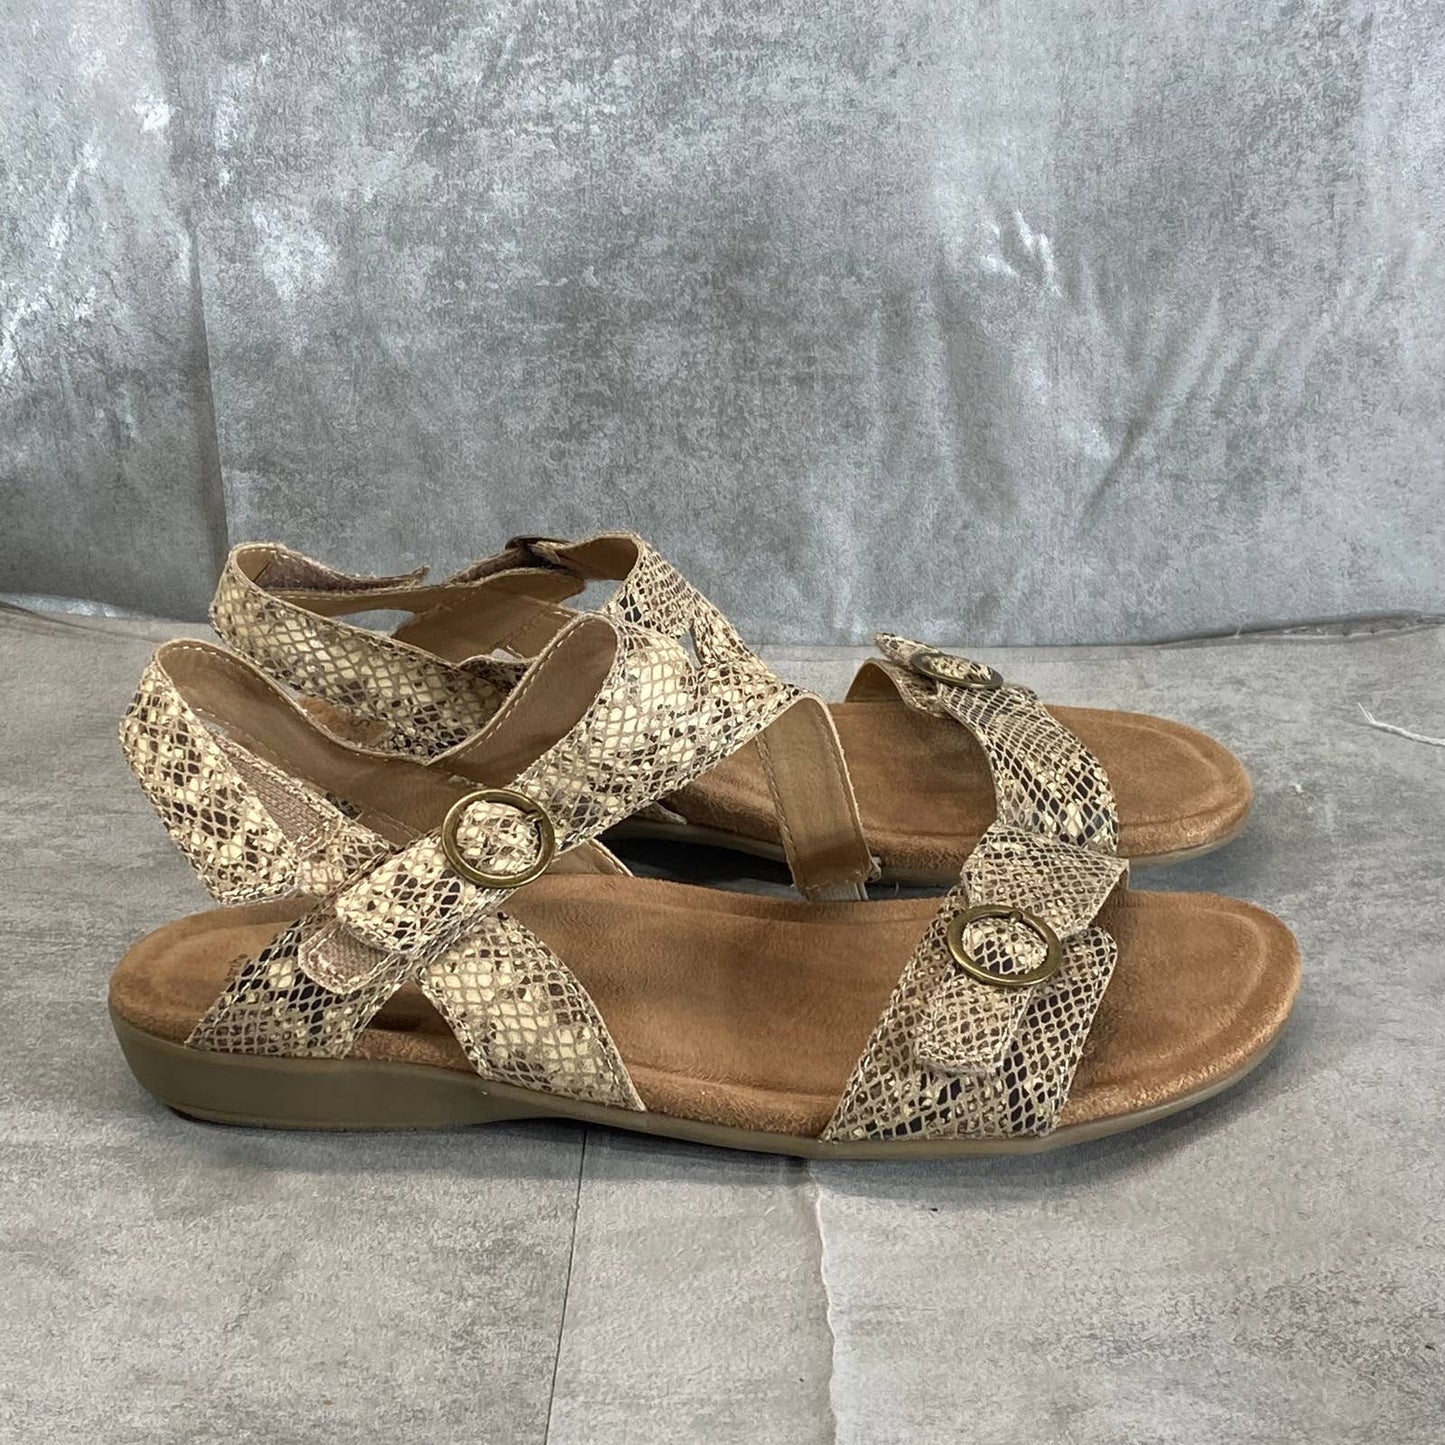 EARTH ORIGINS Women's Taupe Multi Snake Embossed Beck Casual Sandals SZ 11